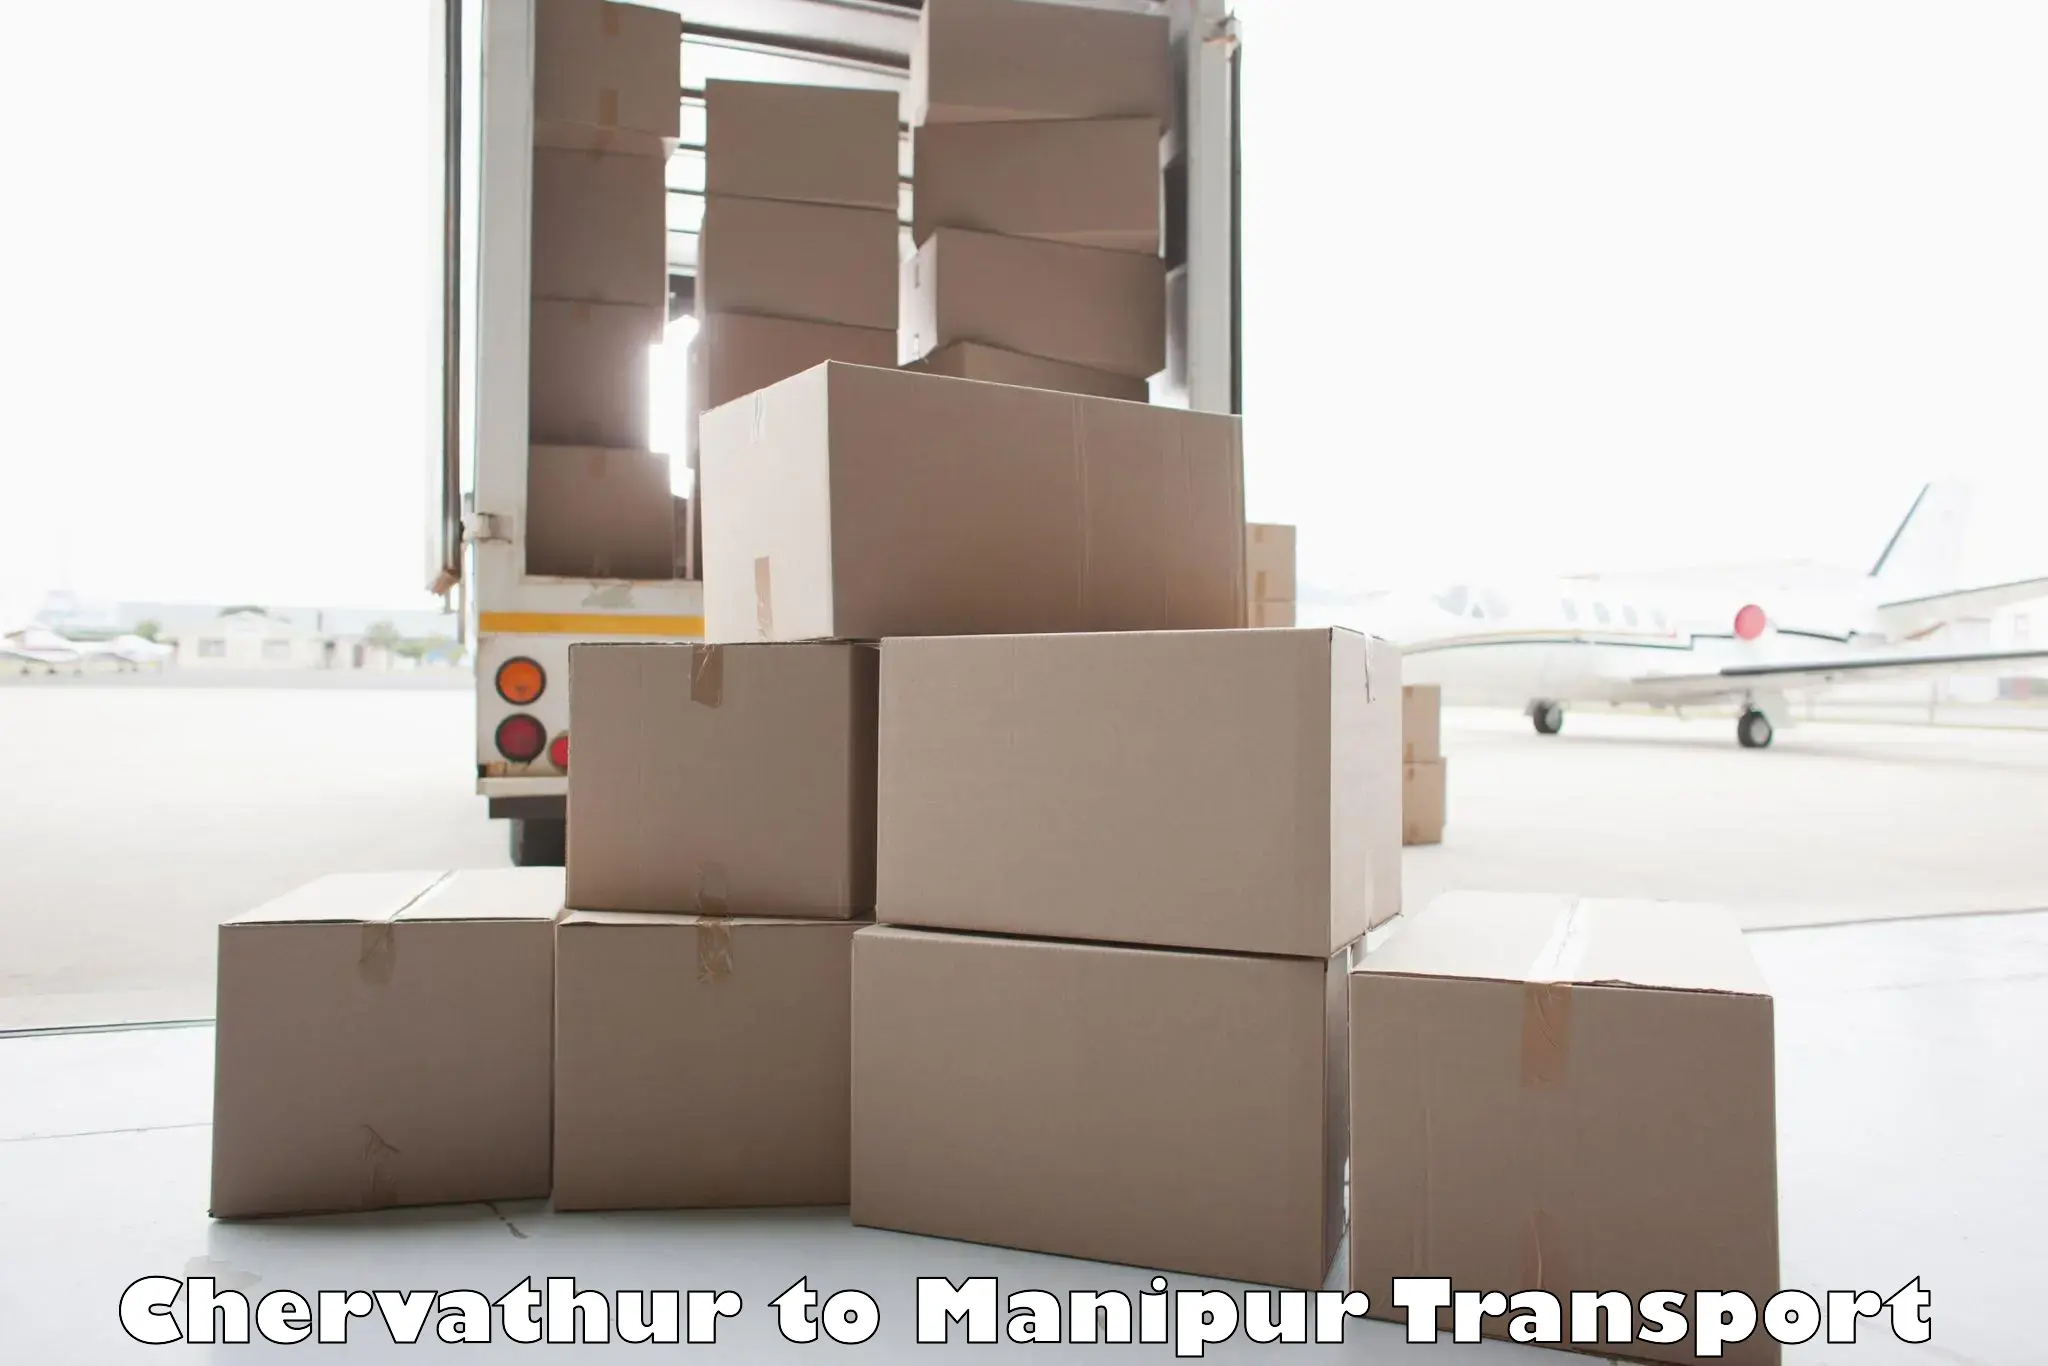 All India transport service Chervathur to Manipur